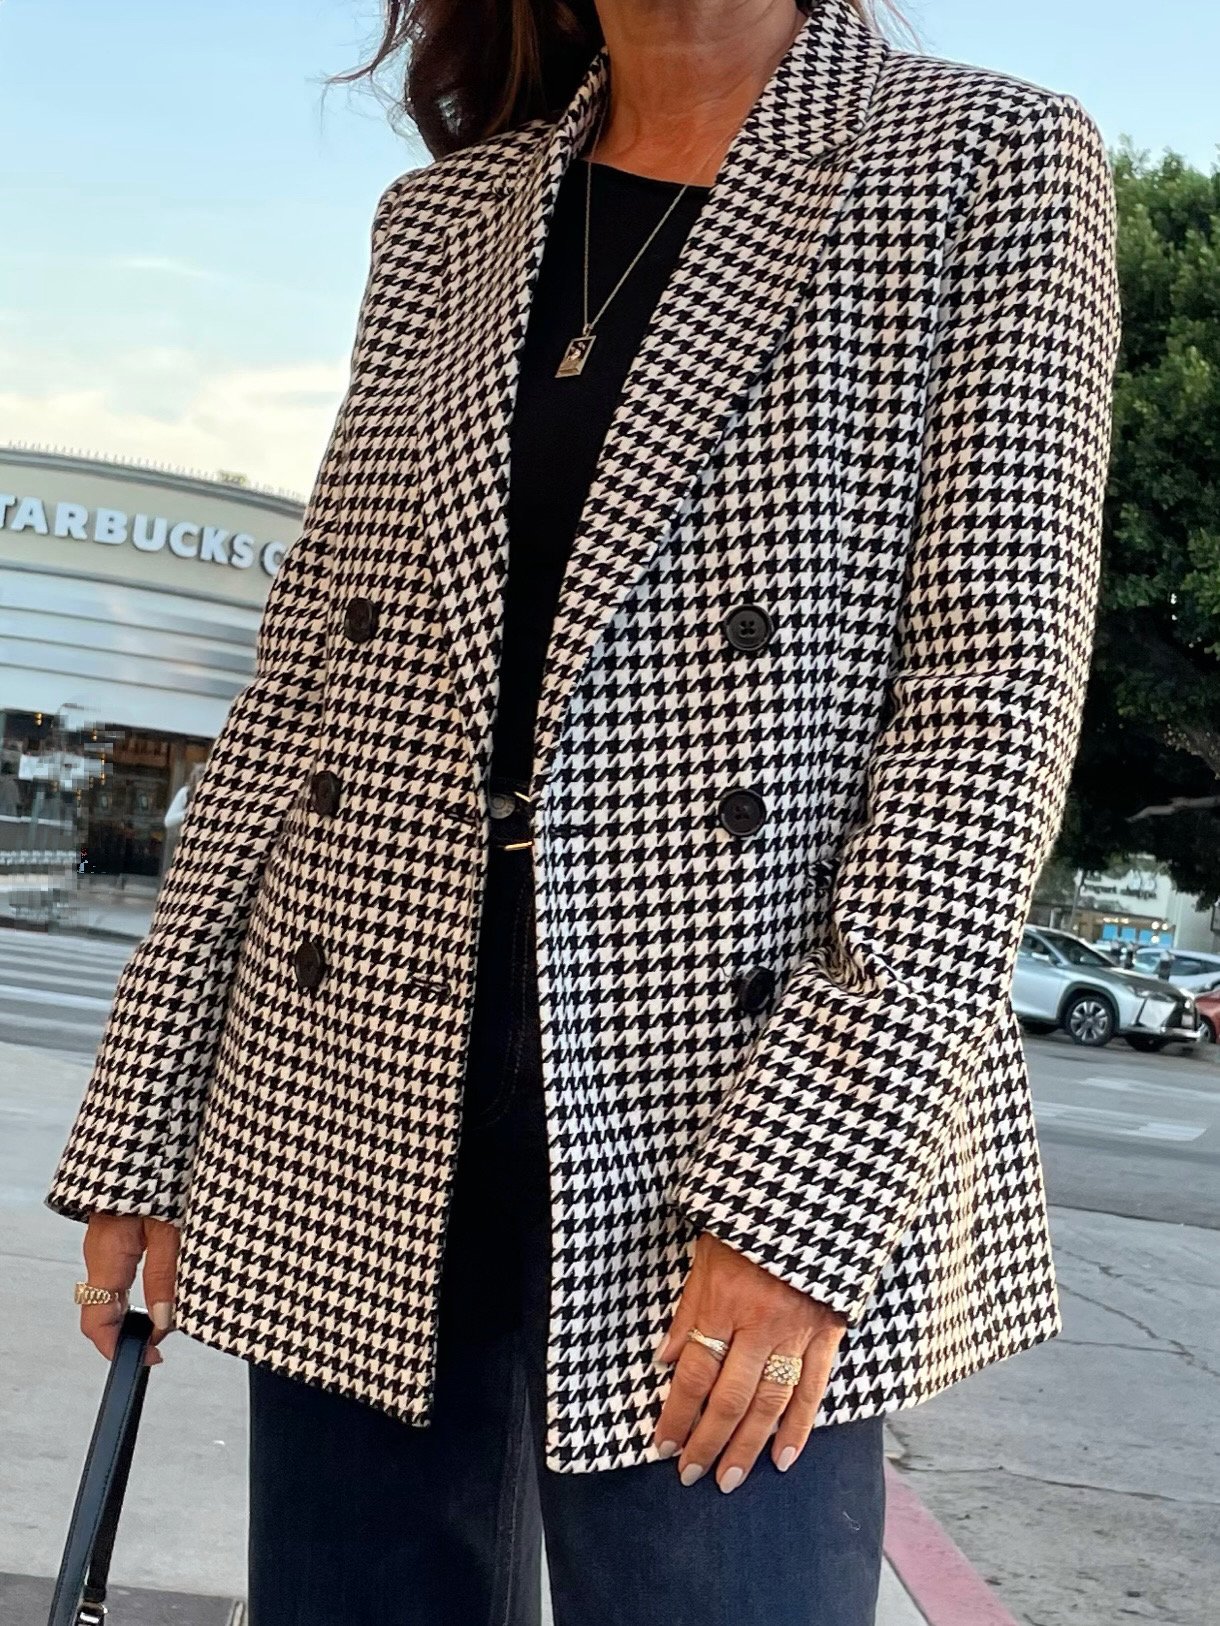 Transition Into Spring With This Houndstooth Blazer — The Glow Girl by  Melissa Meyers